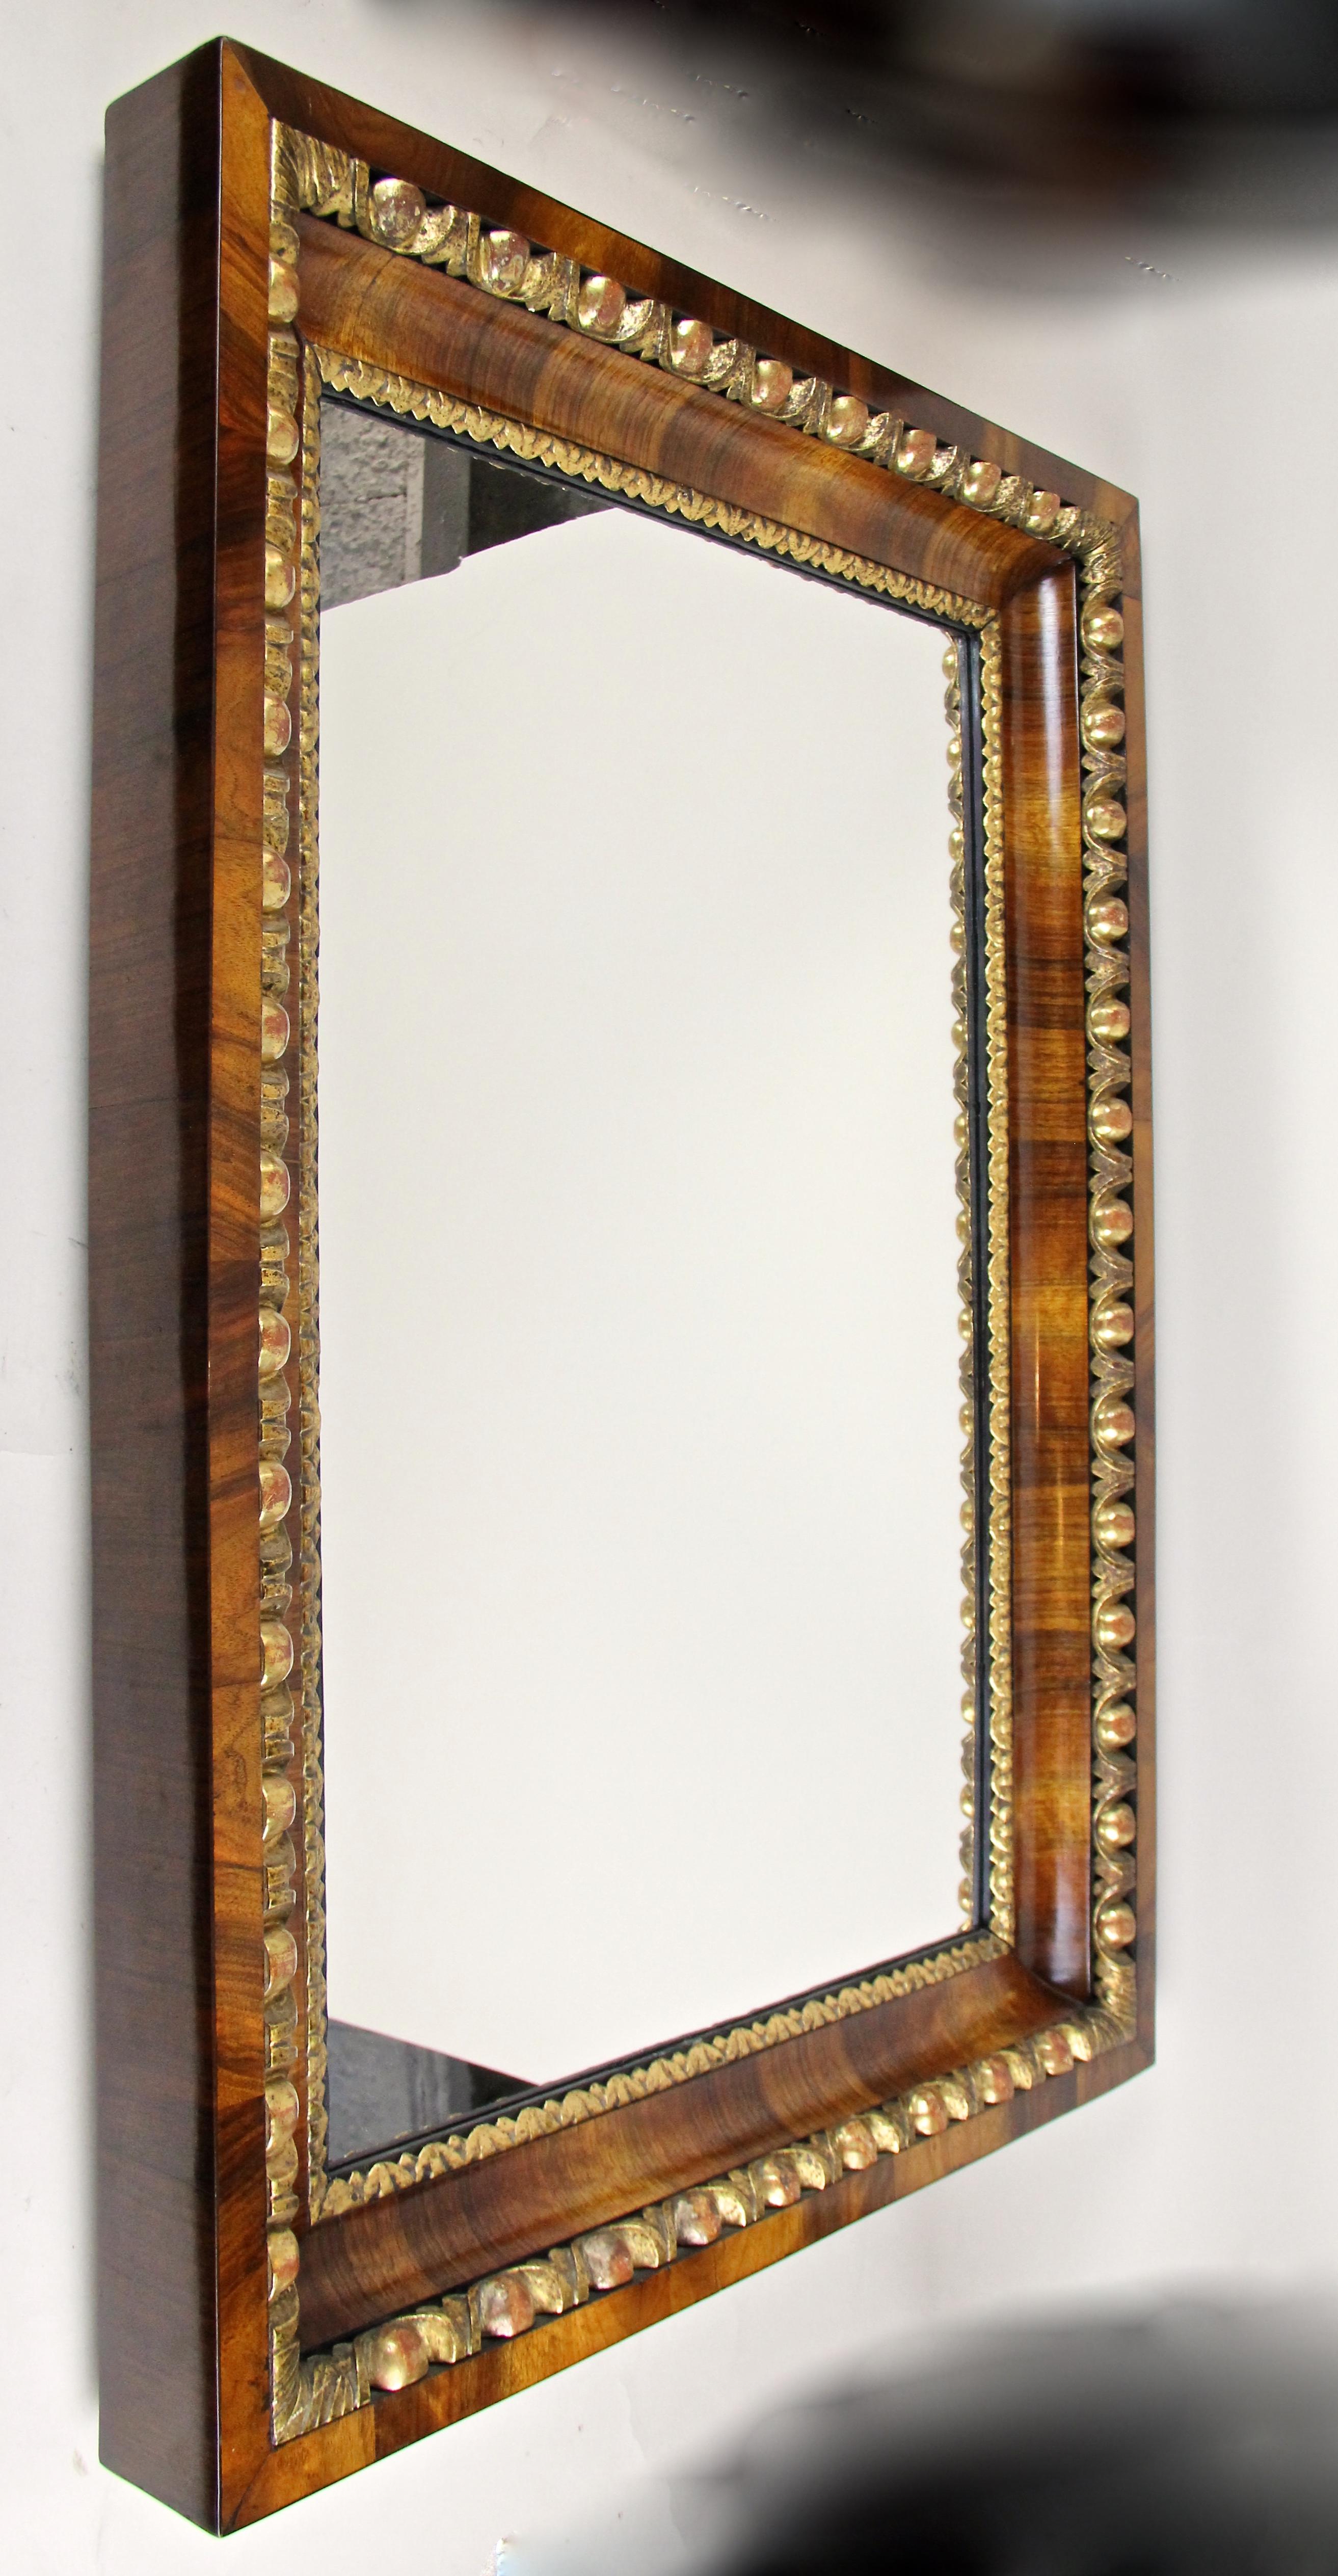 Fantastic early 19th century wall mirror from the famous Biedermeier period in Vienna/Austria around 1820. Featuring an overlapping inserted substructure made of spruce, the massive, deeply grooved frame shows an amazing set walnut veneered surface